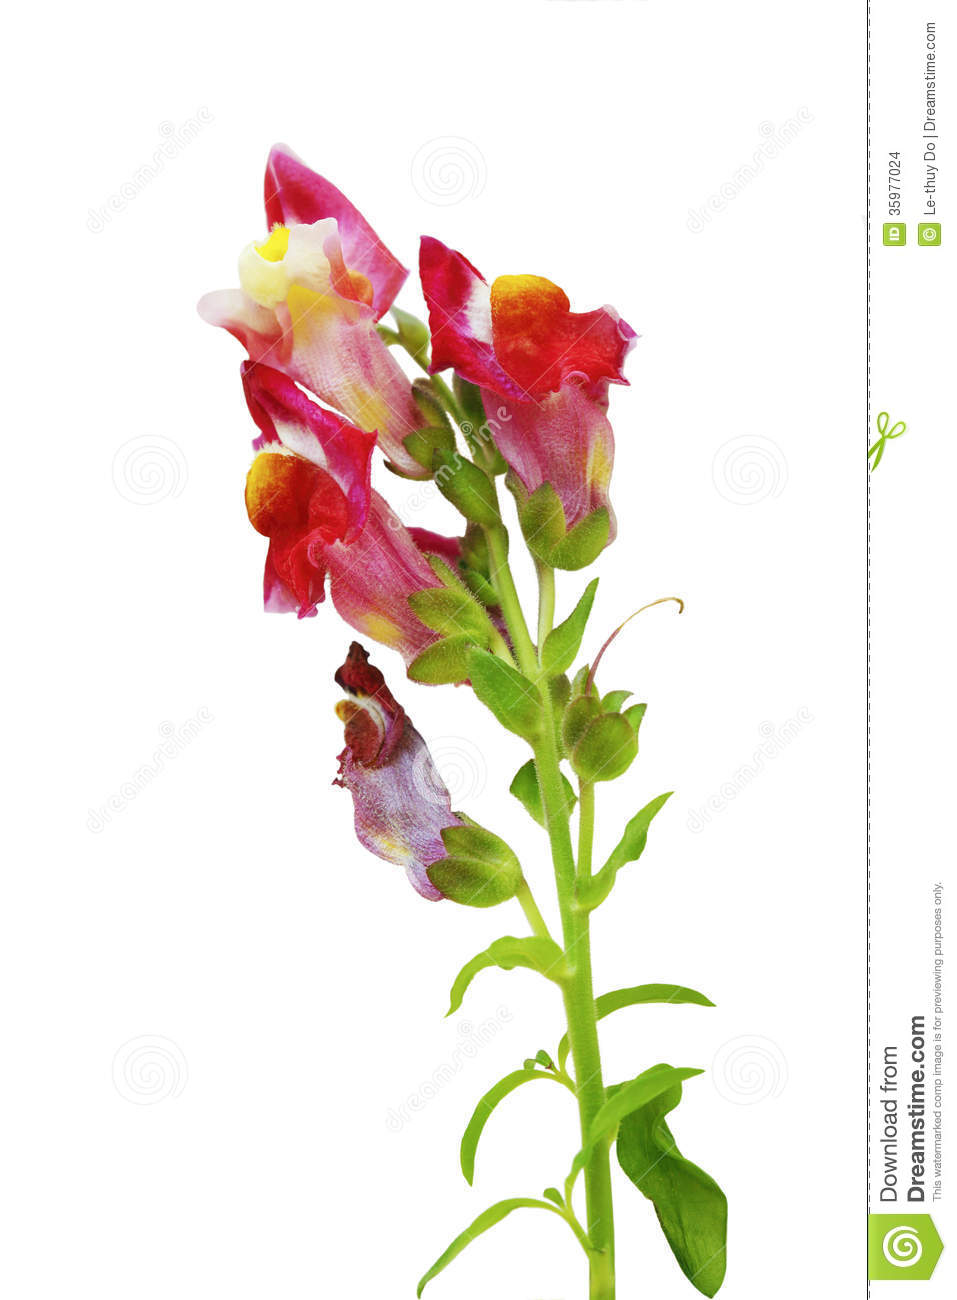 Snapdragons clipart #9, Download drawings